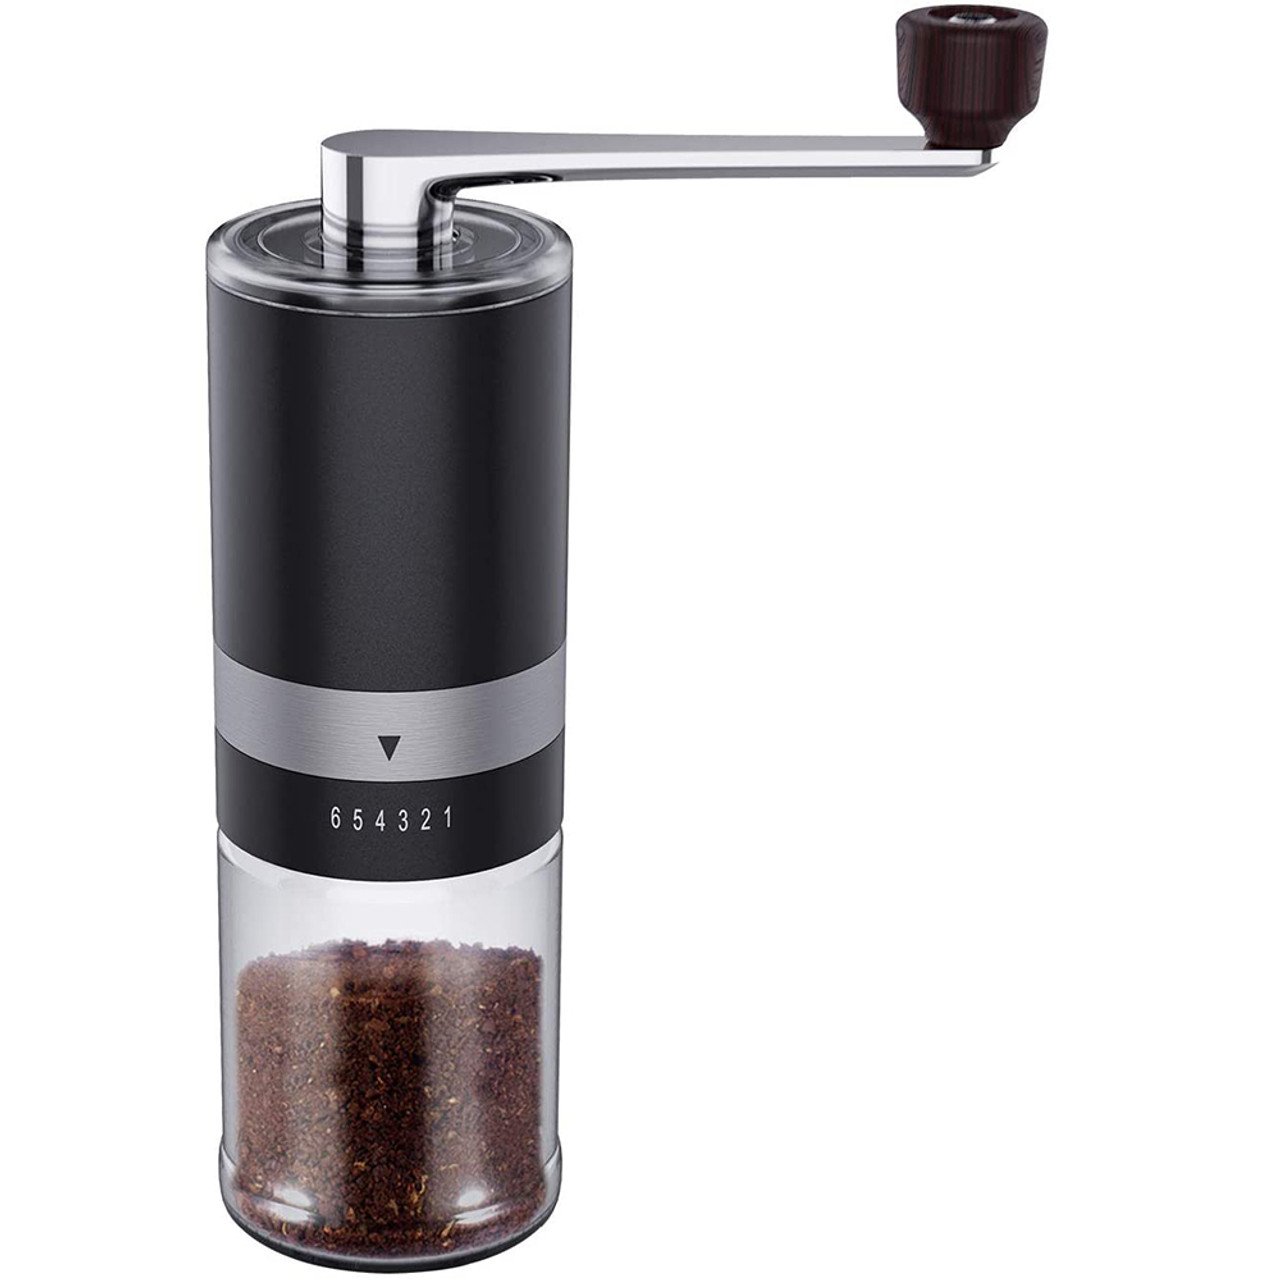 Our Premium Manual Coffee Grinder is Back With New Features 